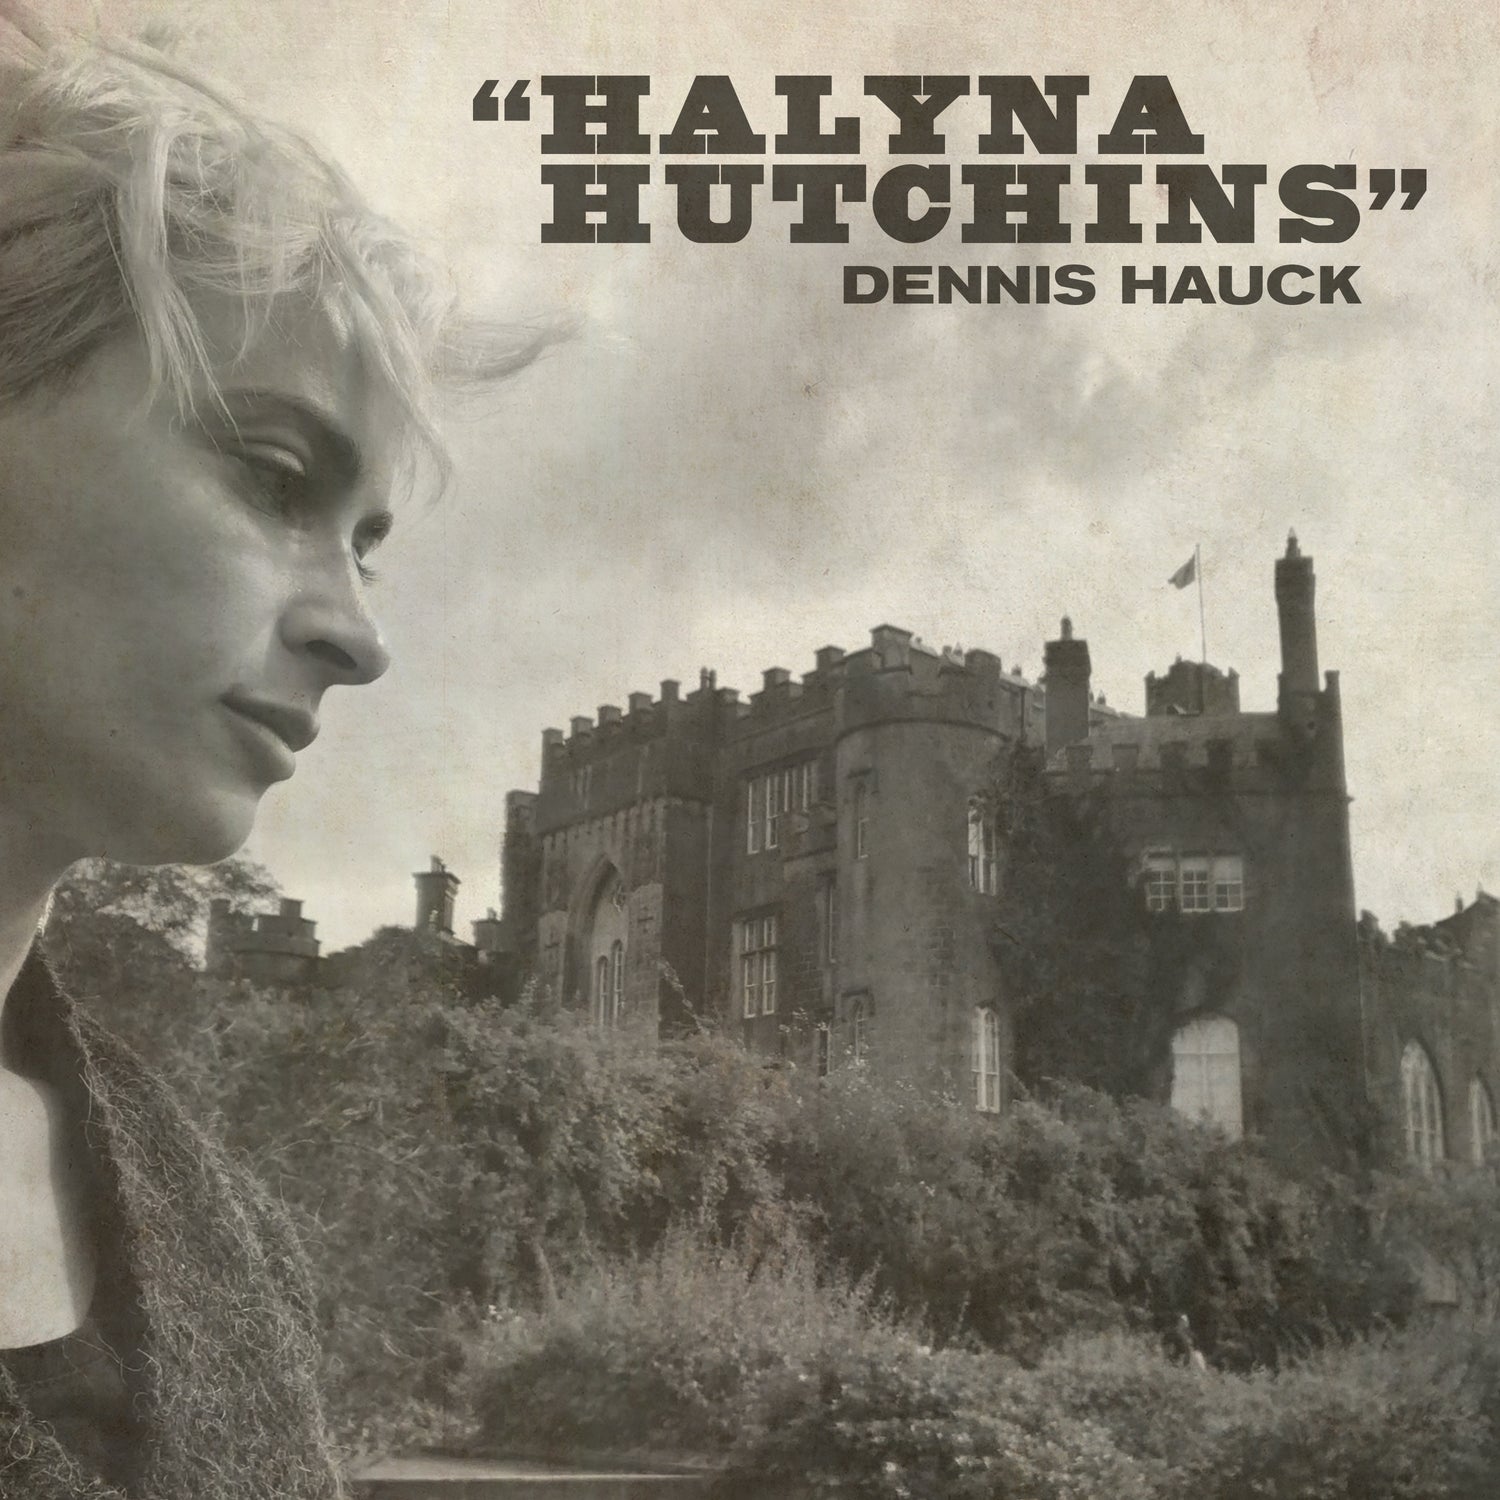 "Halyna Hutchins" by Dennis Hauck